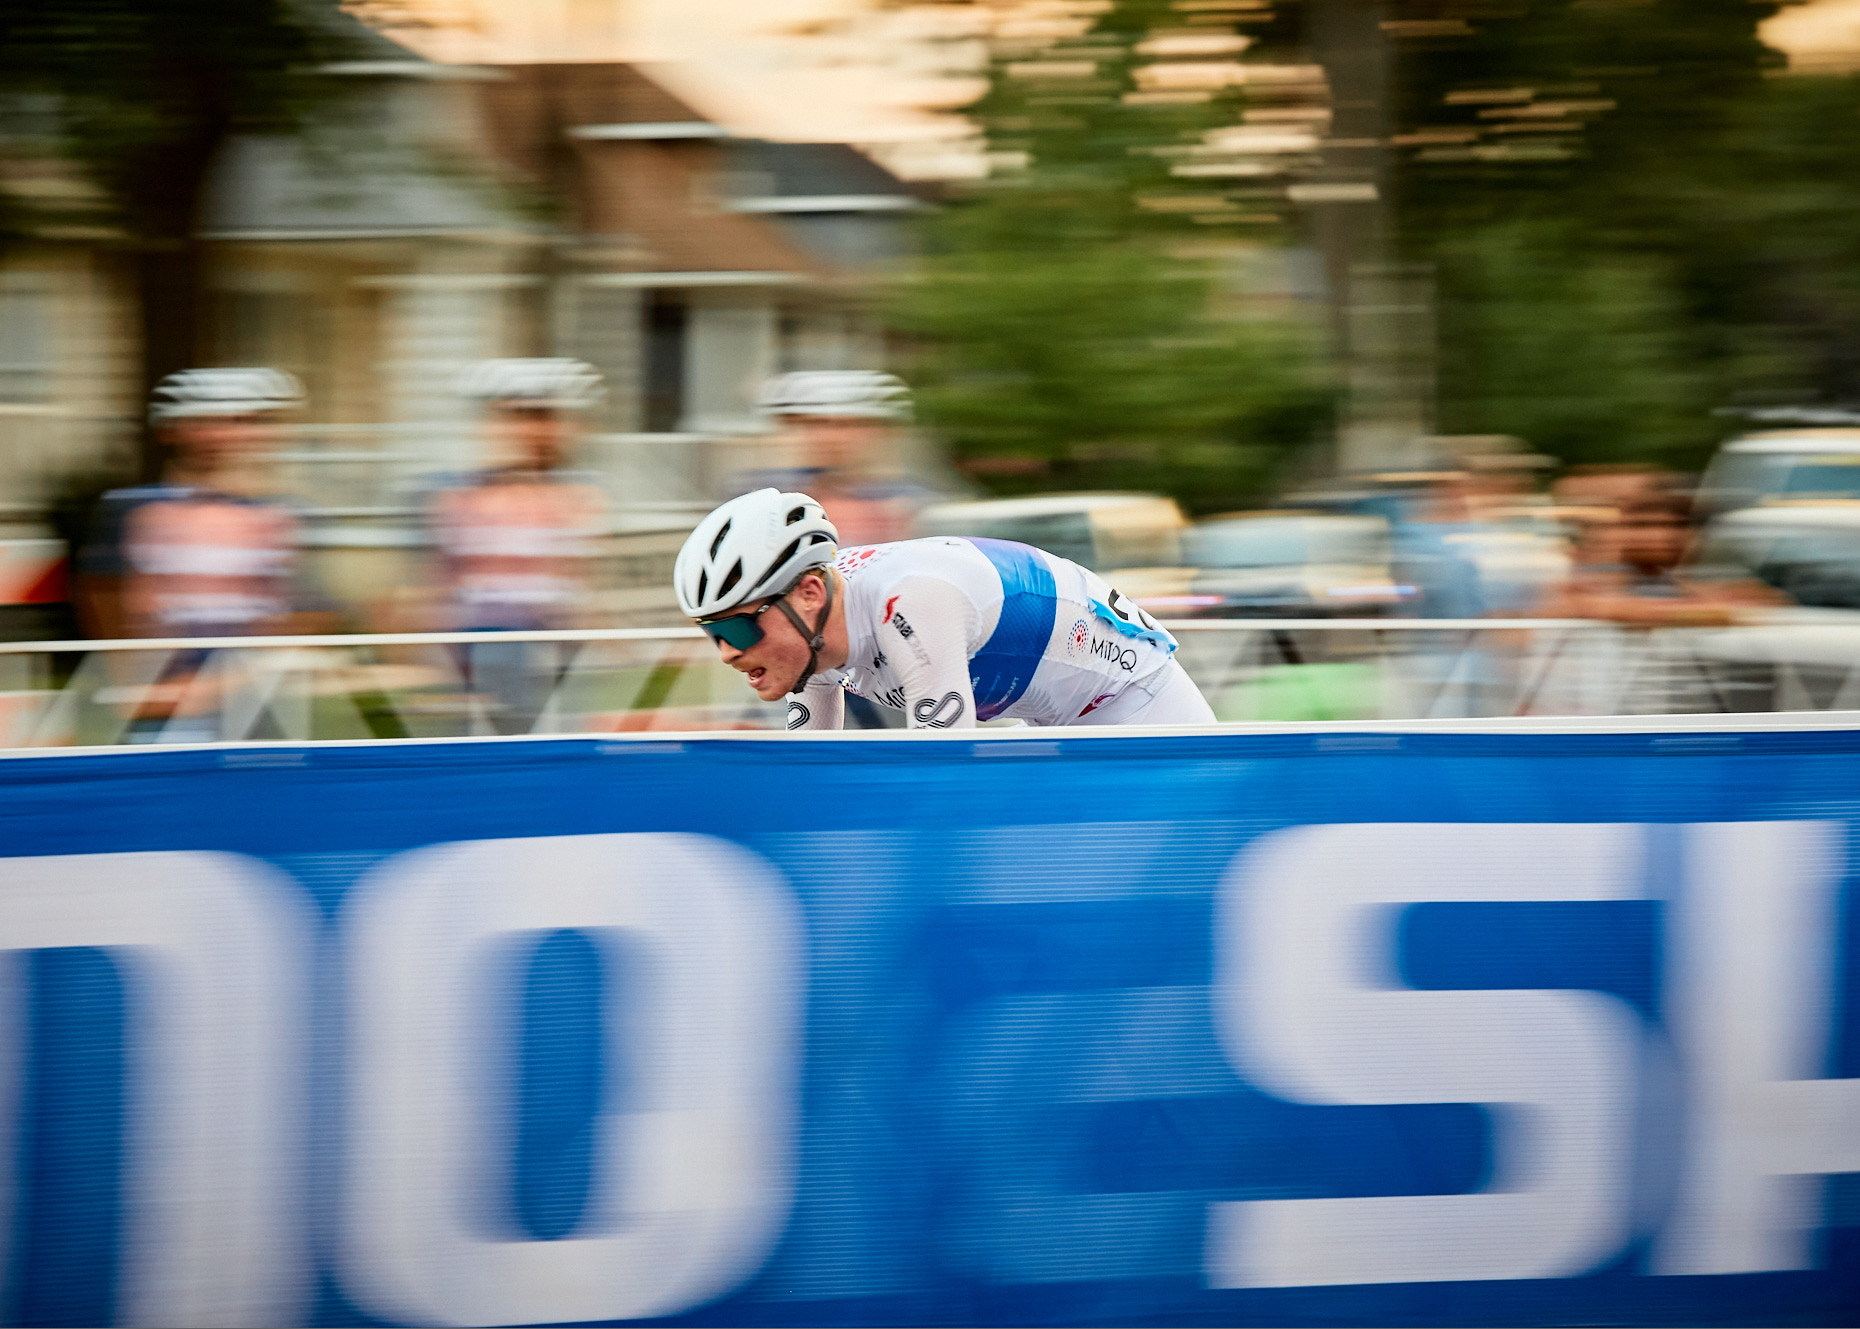 Bicycle racer blurring at high speed | Sports and Lifestyle photography by Saverio Truglia